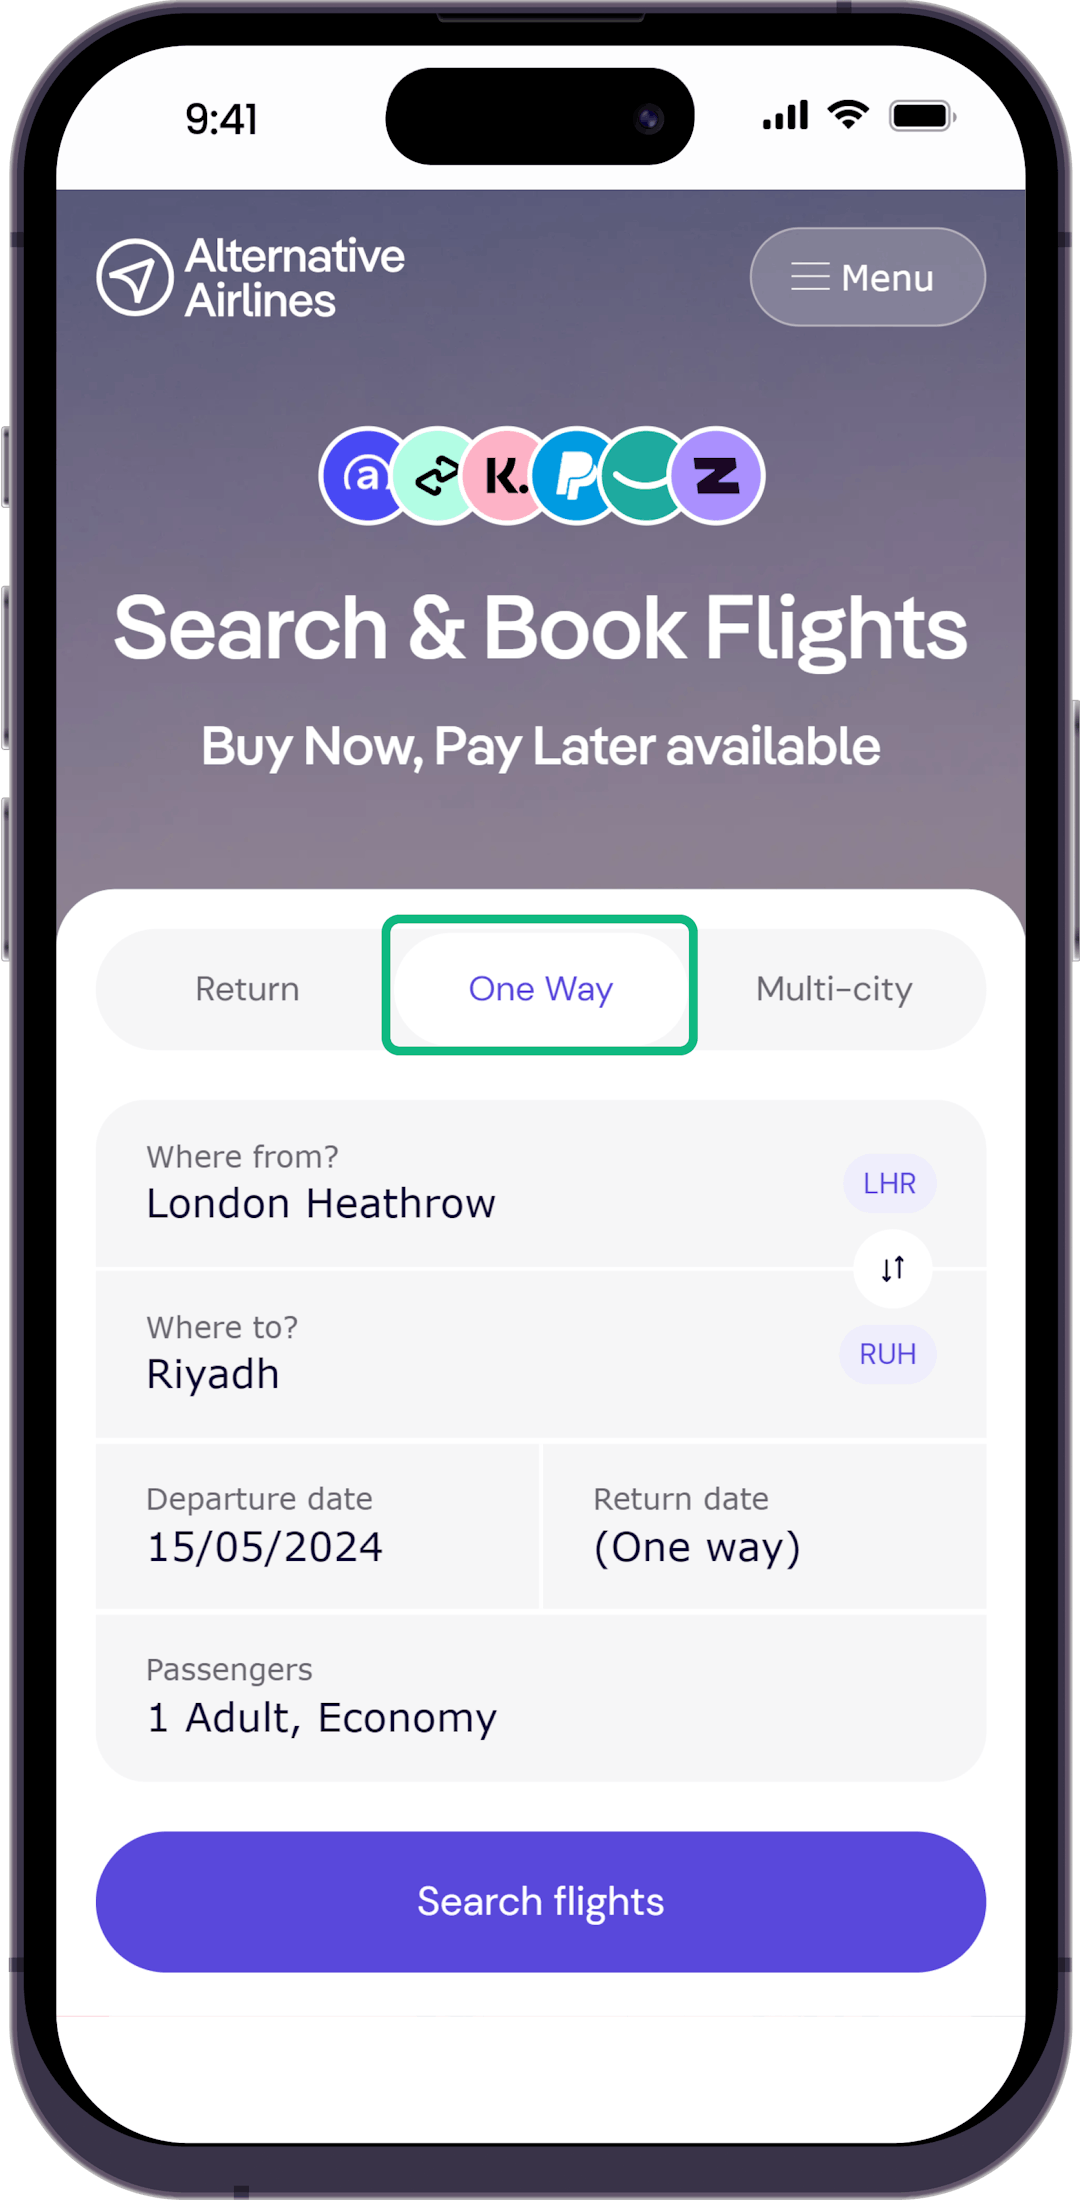 Step 1 - Select one-way option in search form